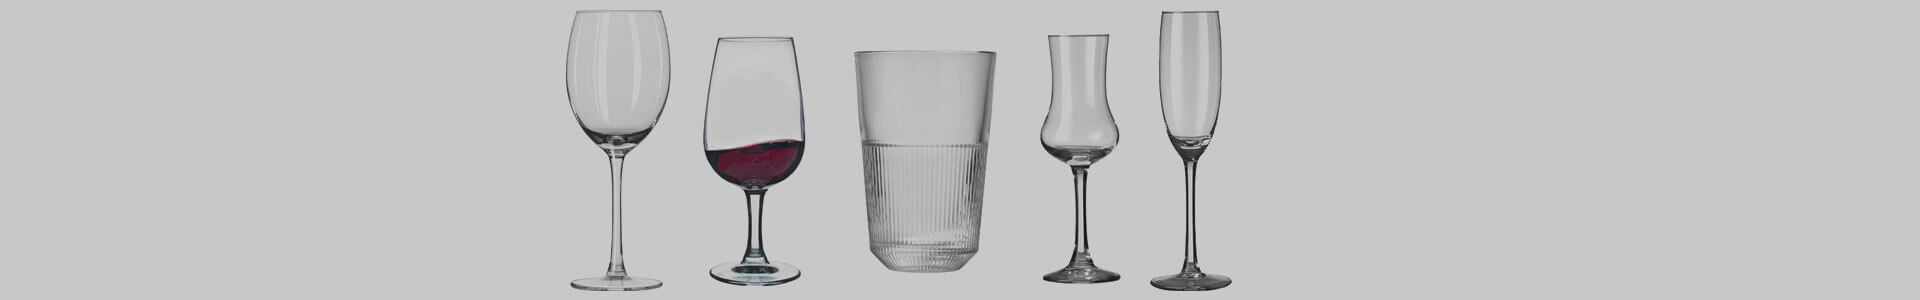 Various glasses from the manufacturer Royal Leerdam stand next to each other.